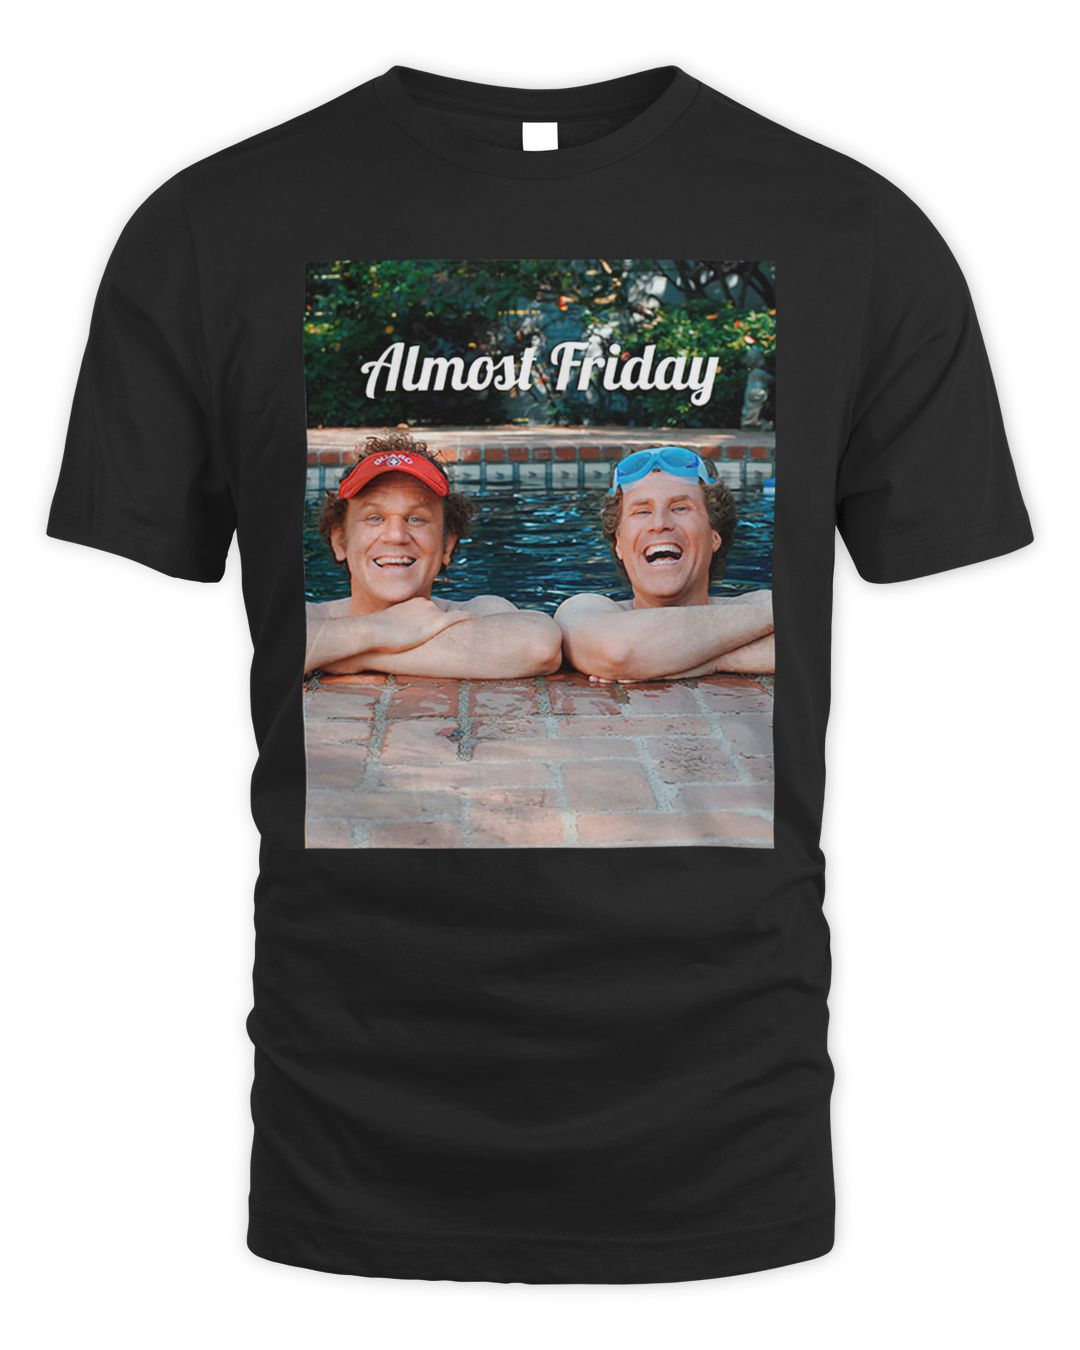 Friday Beers Merch Almost Friday Pool Fun Shirt